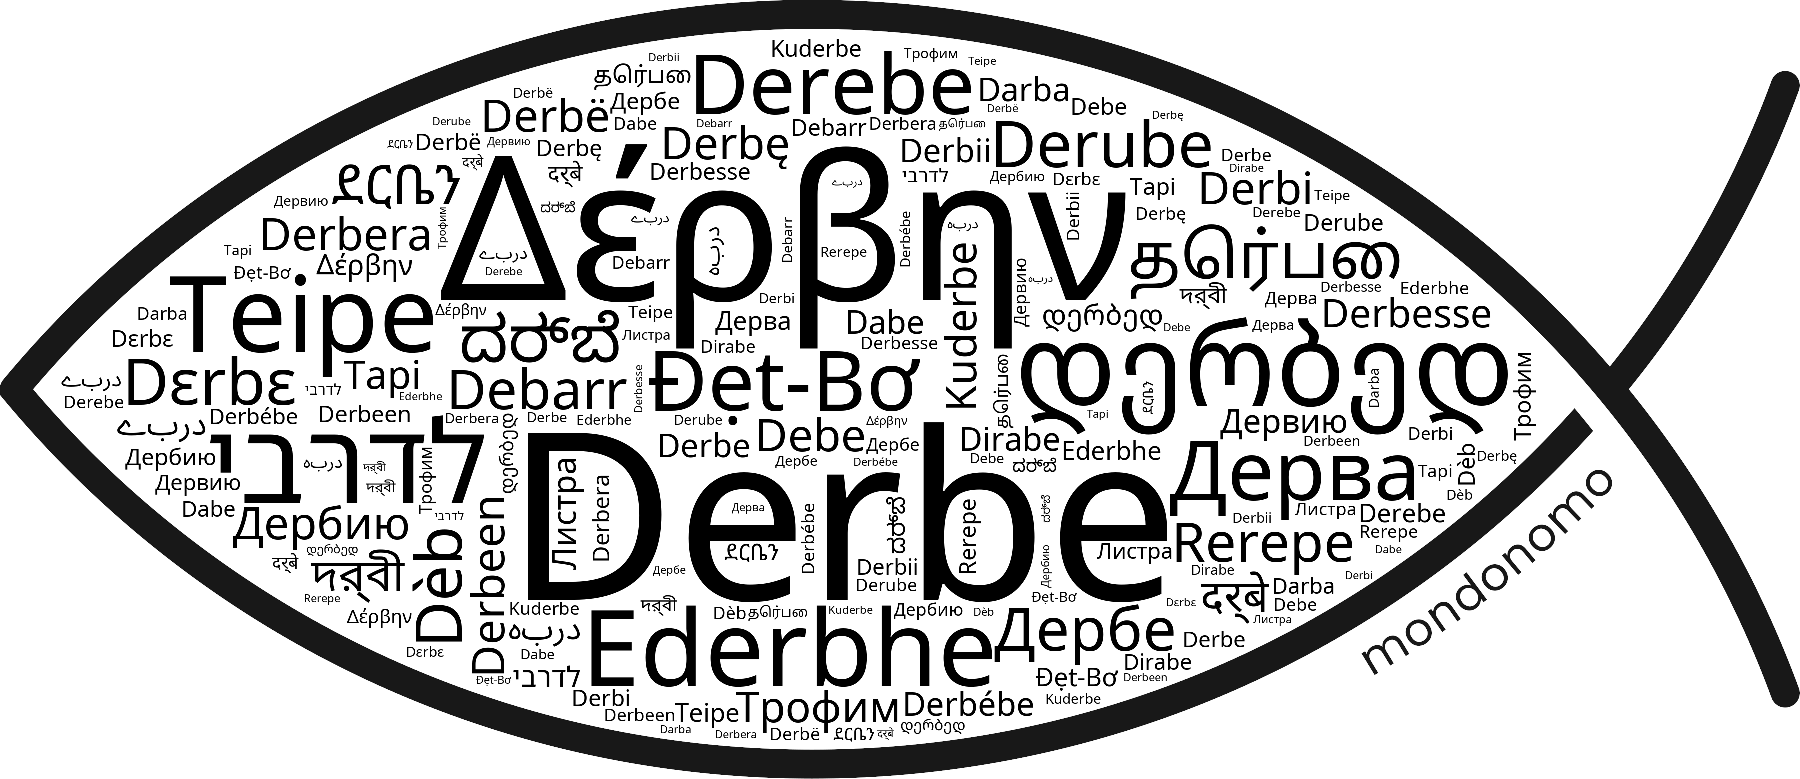 Name Derbe in the world's Bibles